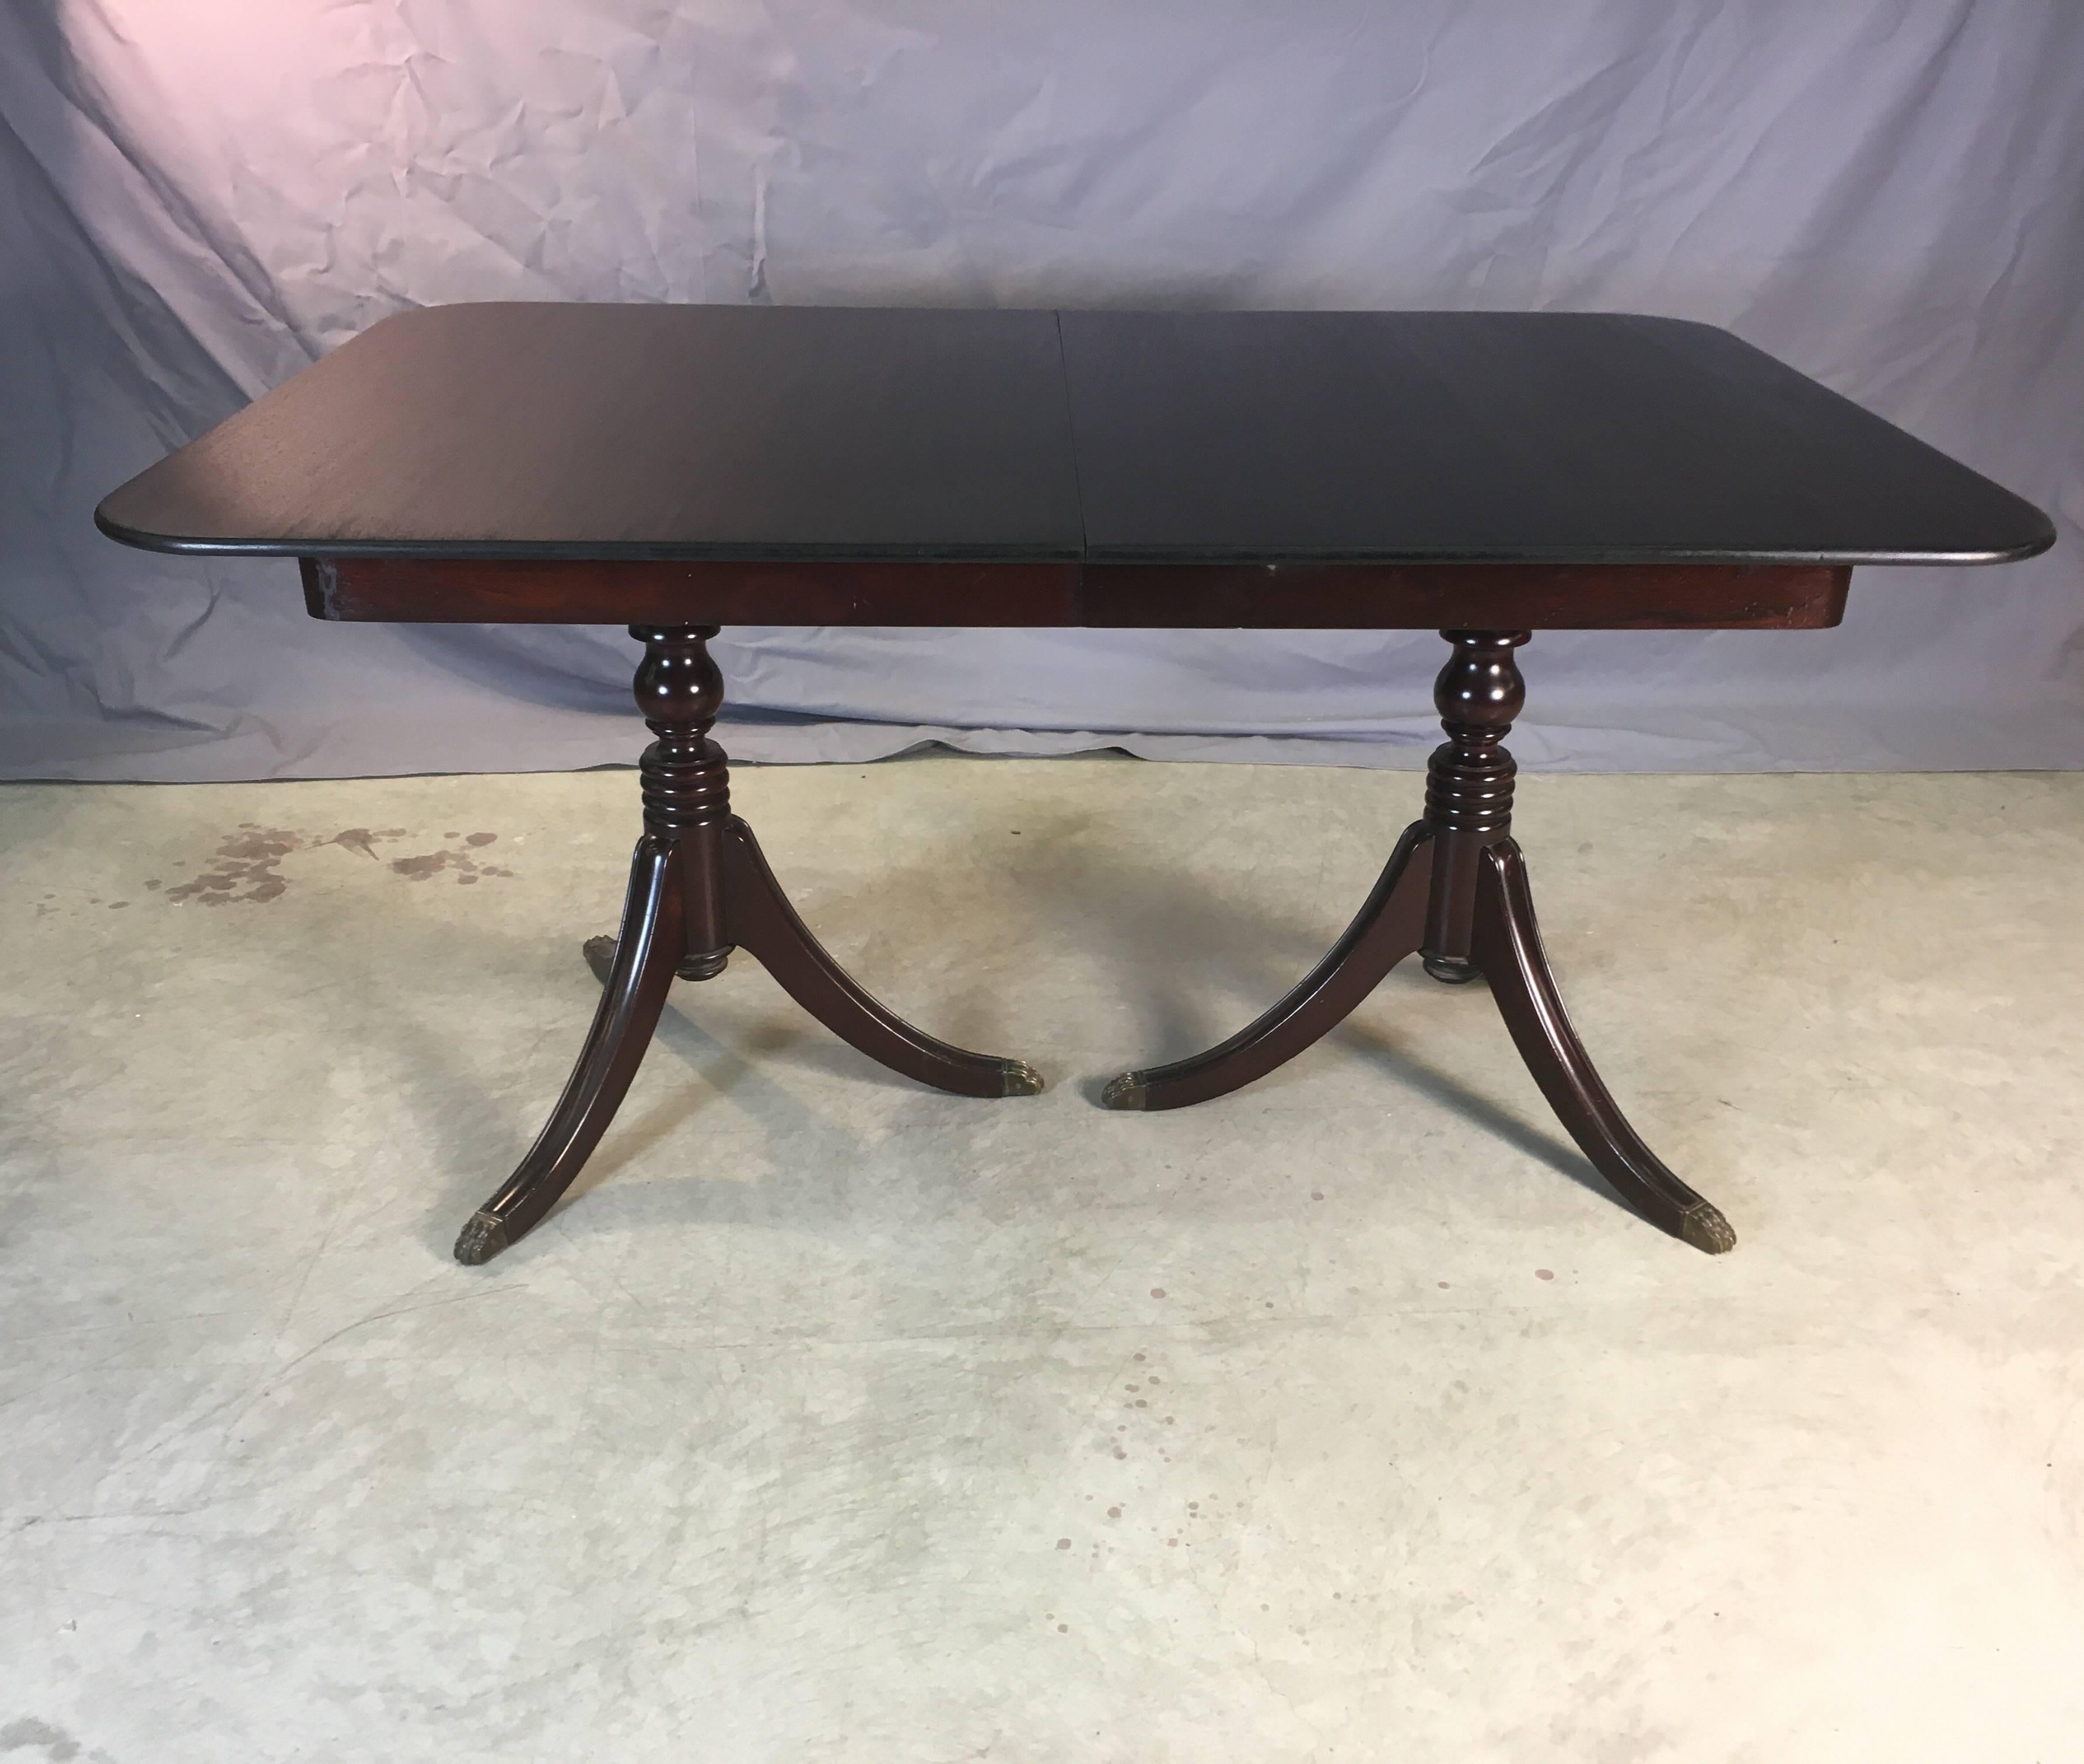 Mahogany Wood Banquet Dining Room Table In Good Condition For Sale In Amherst, NH